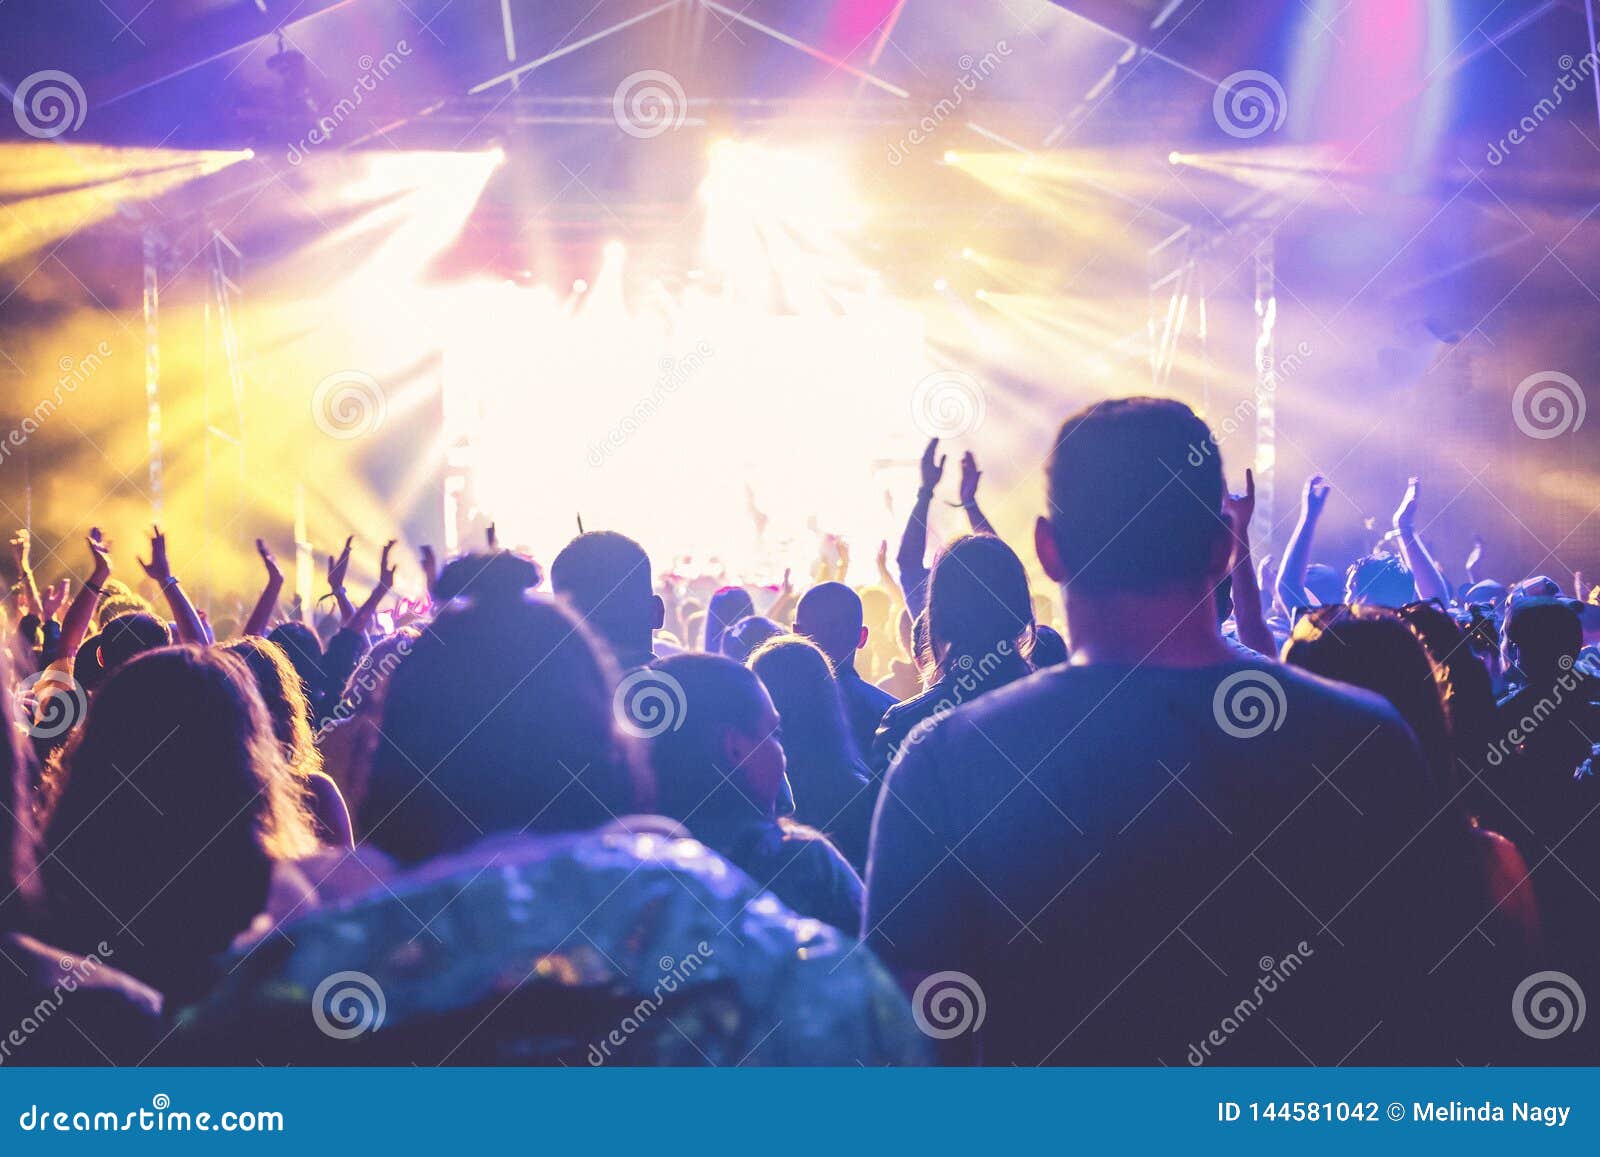 Cheering Crowd with Raised Hands at Concert - Music Festival Editorial ...